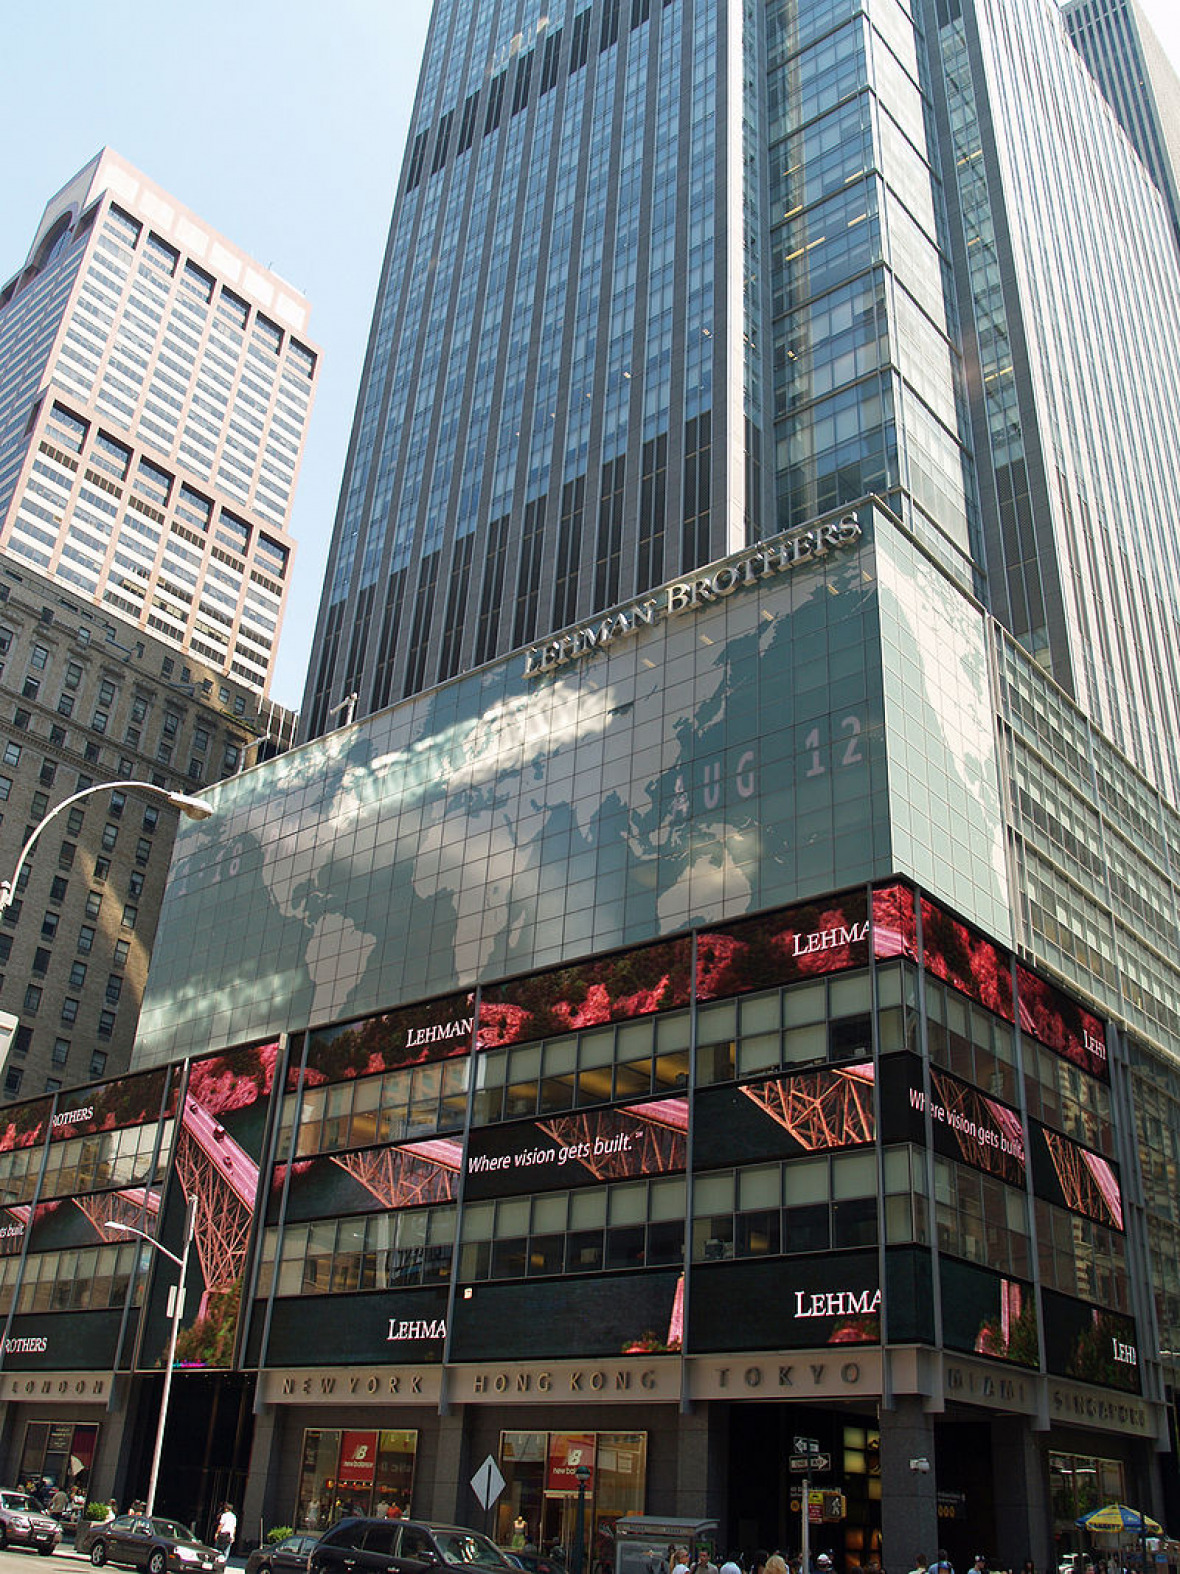 The Lehman Brothers headquarters in New York in August 2007, about a year before the bankruptcy.